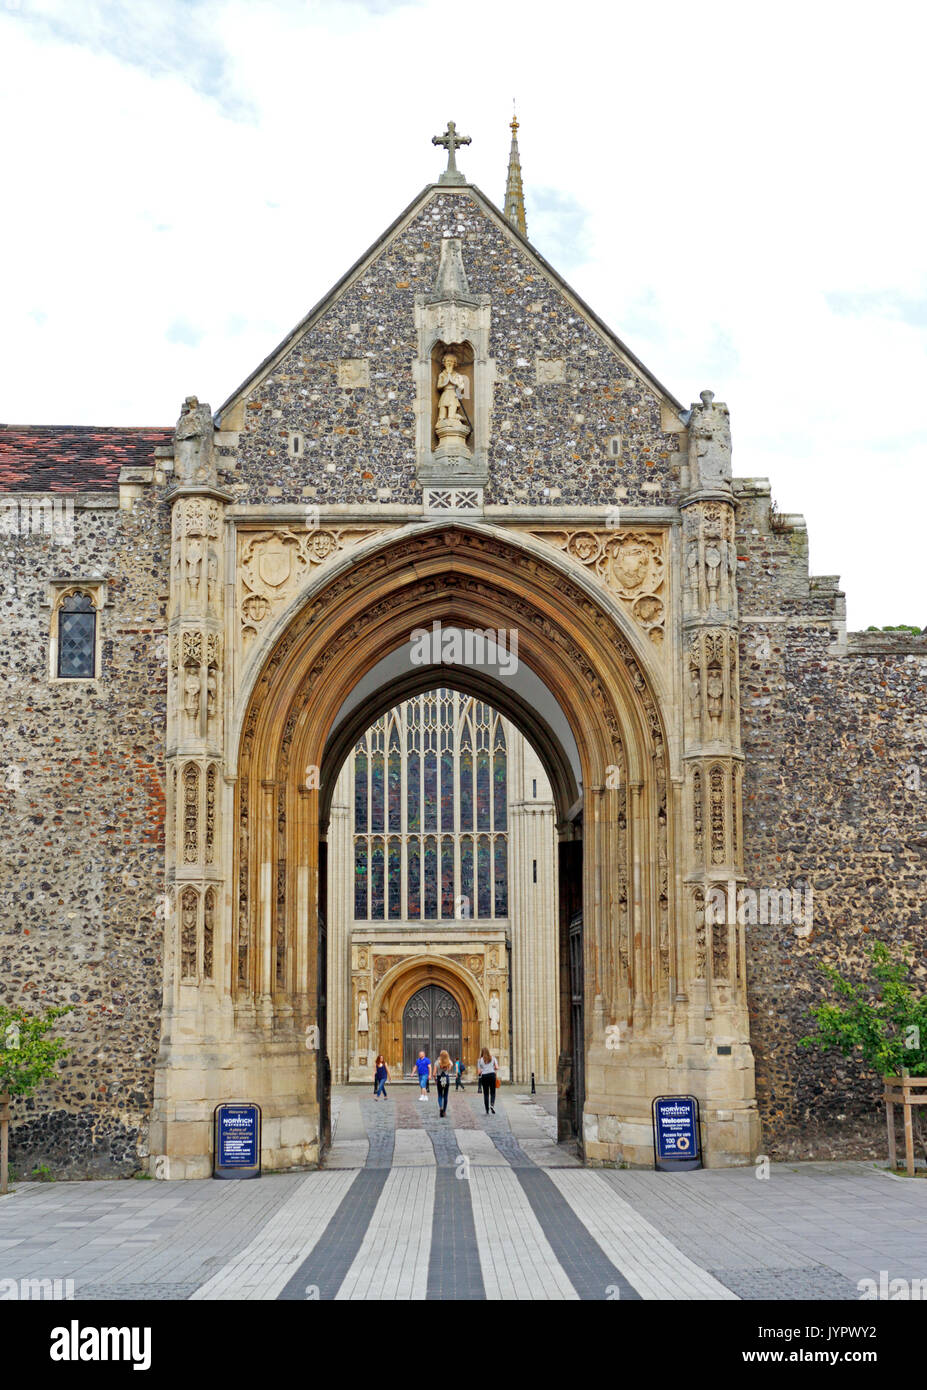 A view of the Erpingham Gate access to the Cathedral from Tombland in the City of Norwich, Norfolk, England, United Kingdom. Stock Photo